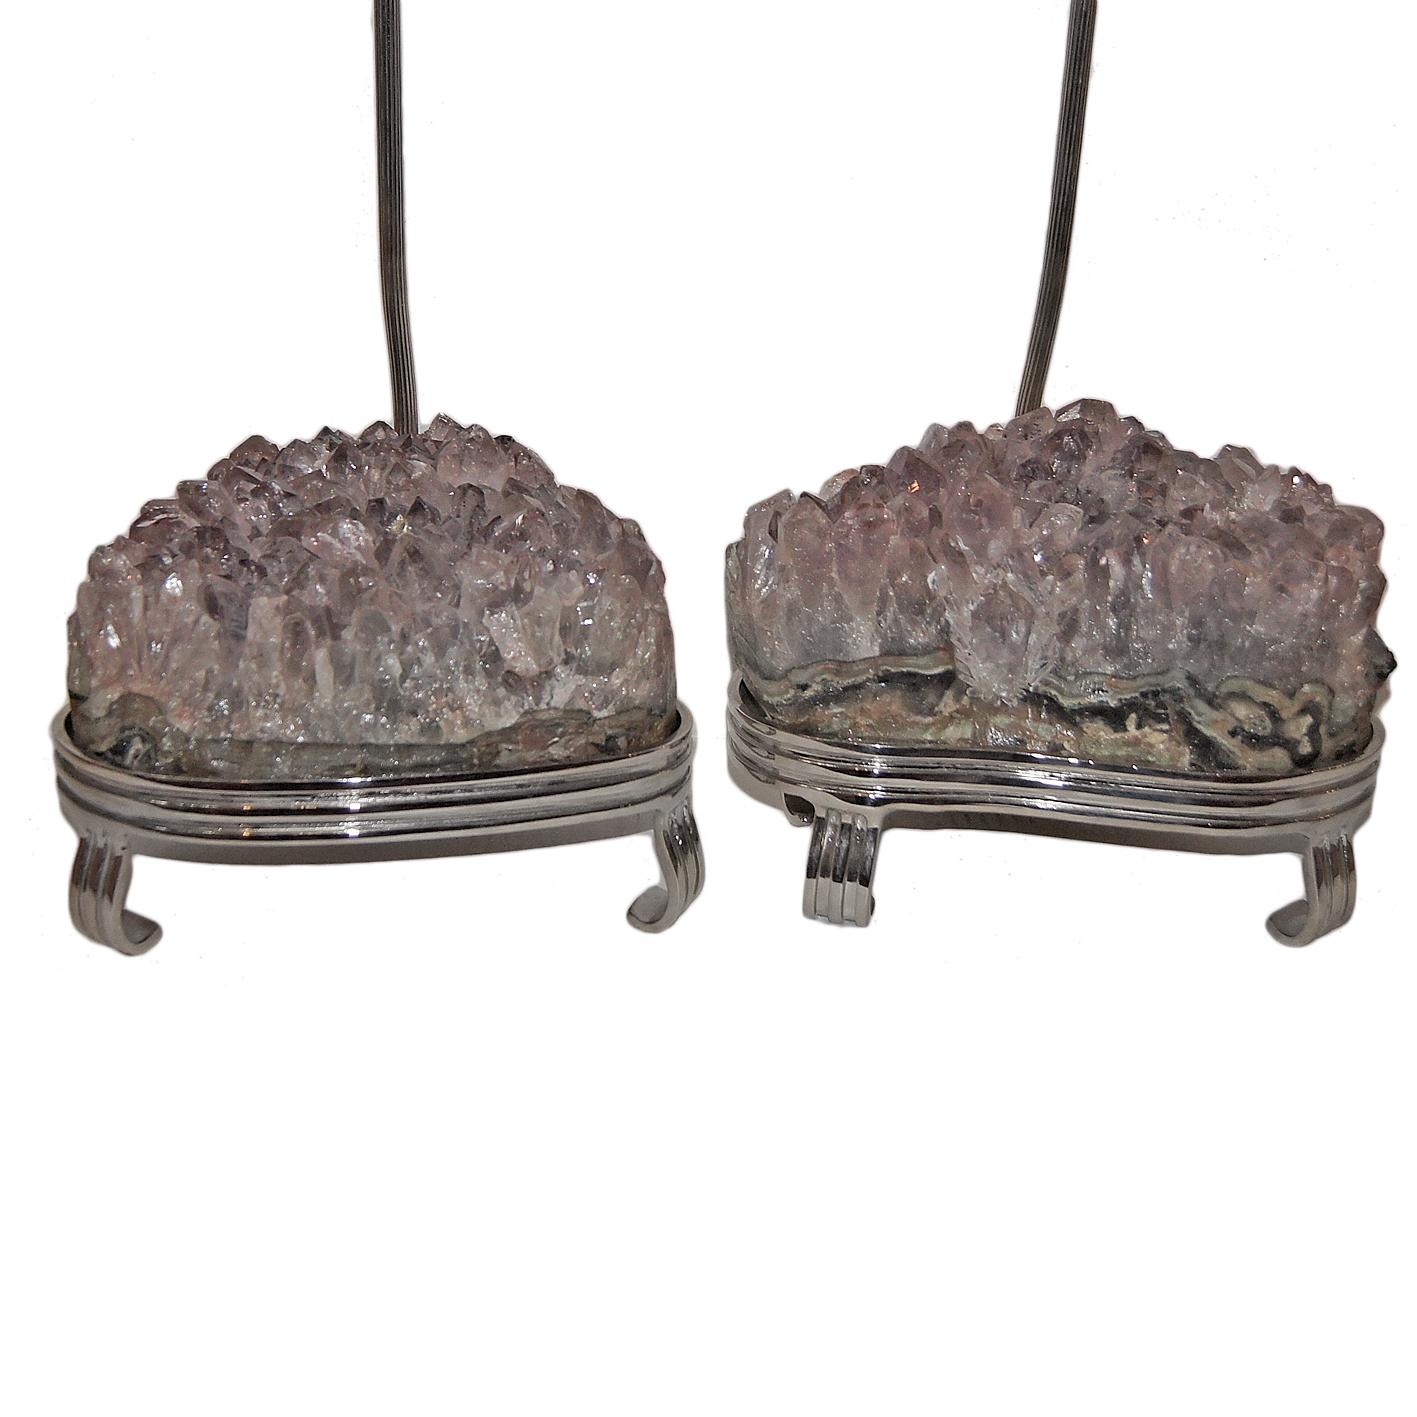 A pair of circa 1960's silver finish Italian table lamps with amethyst stones.

Measurements:
Height to shade rest: 35